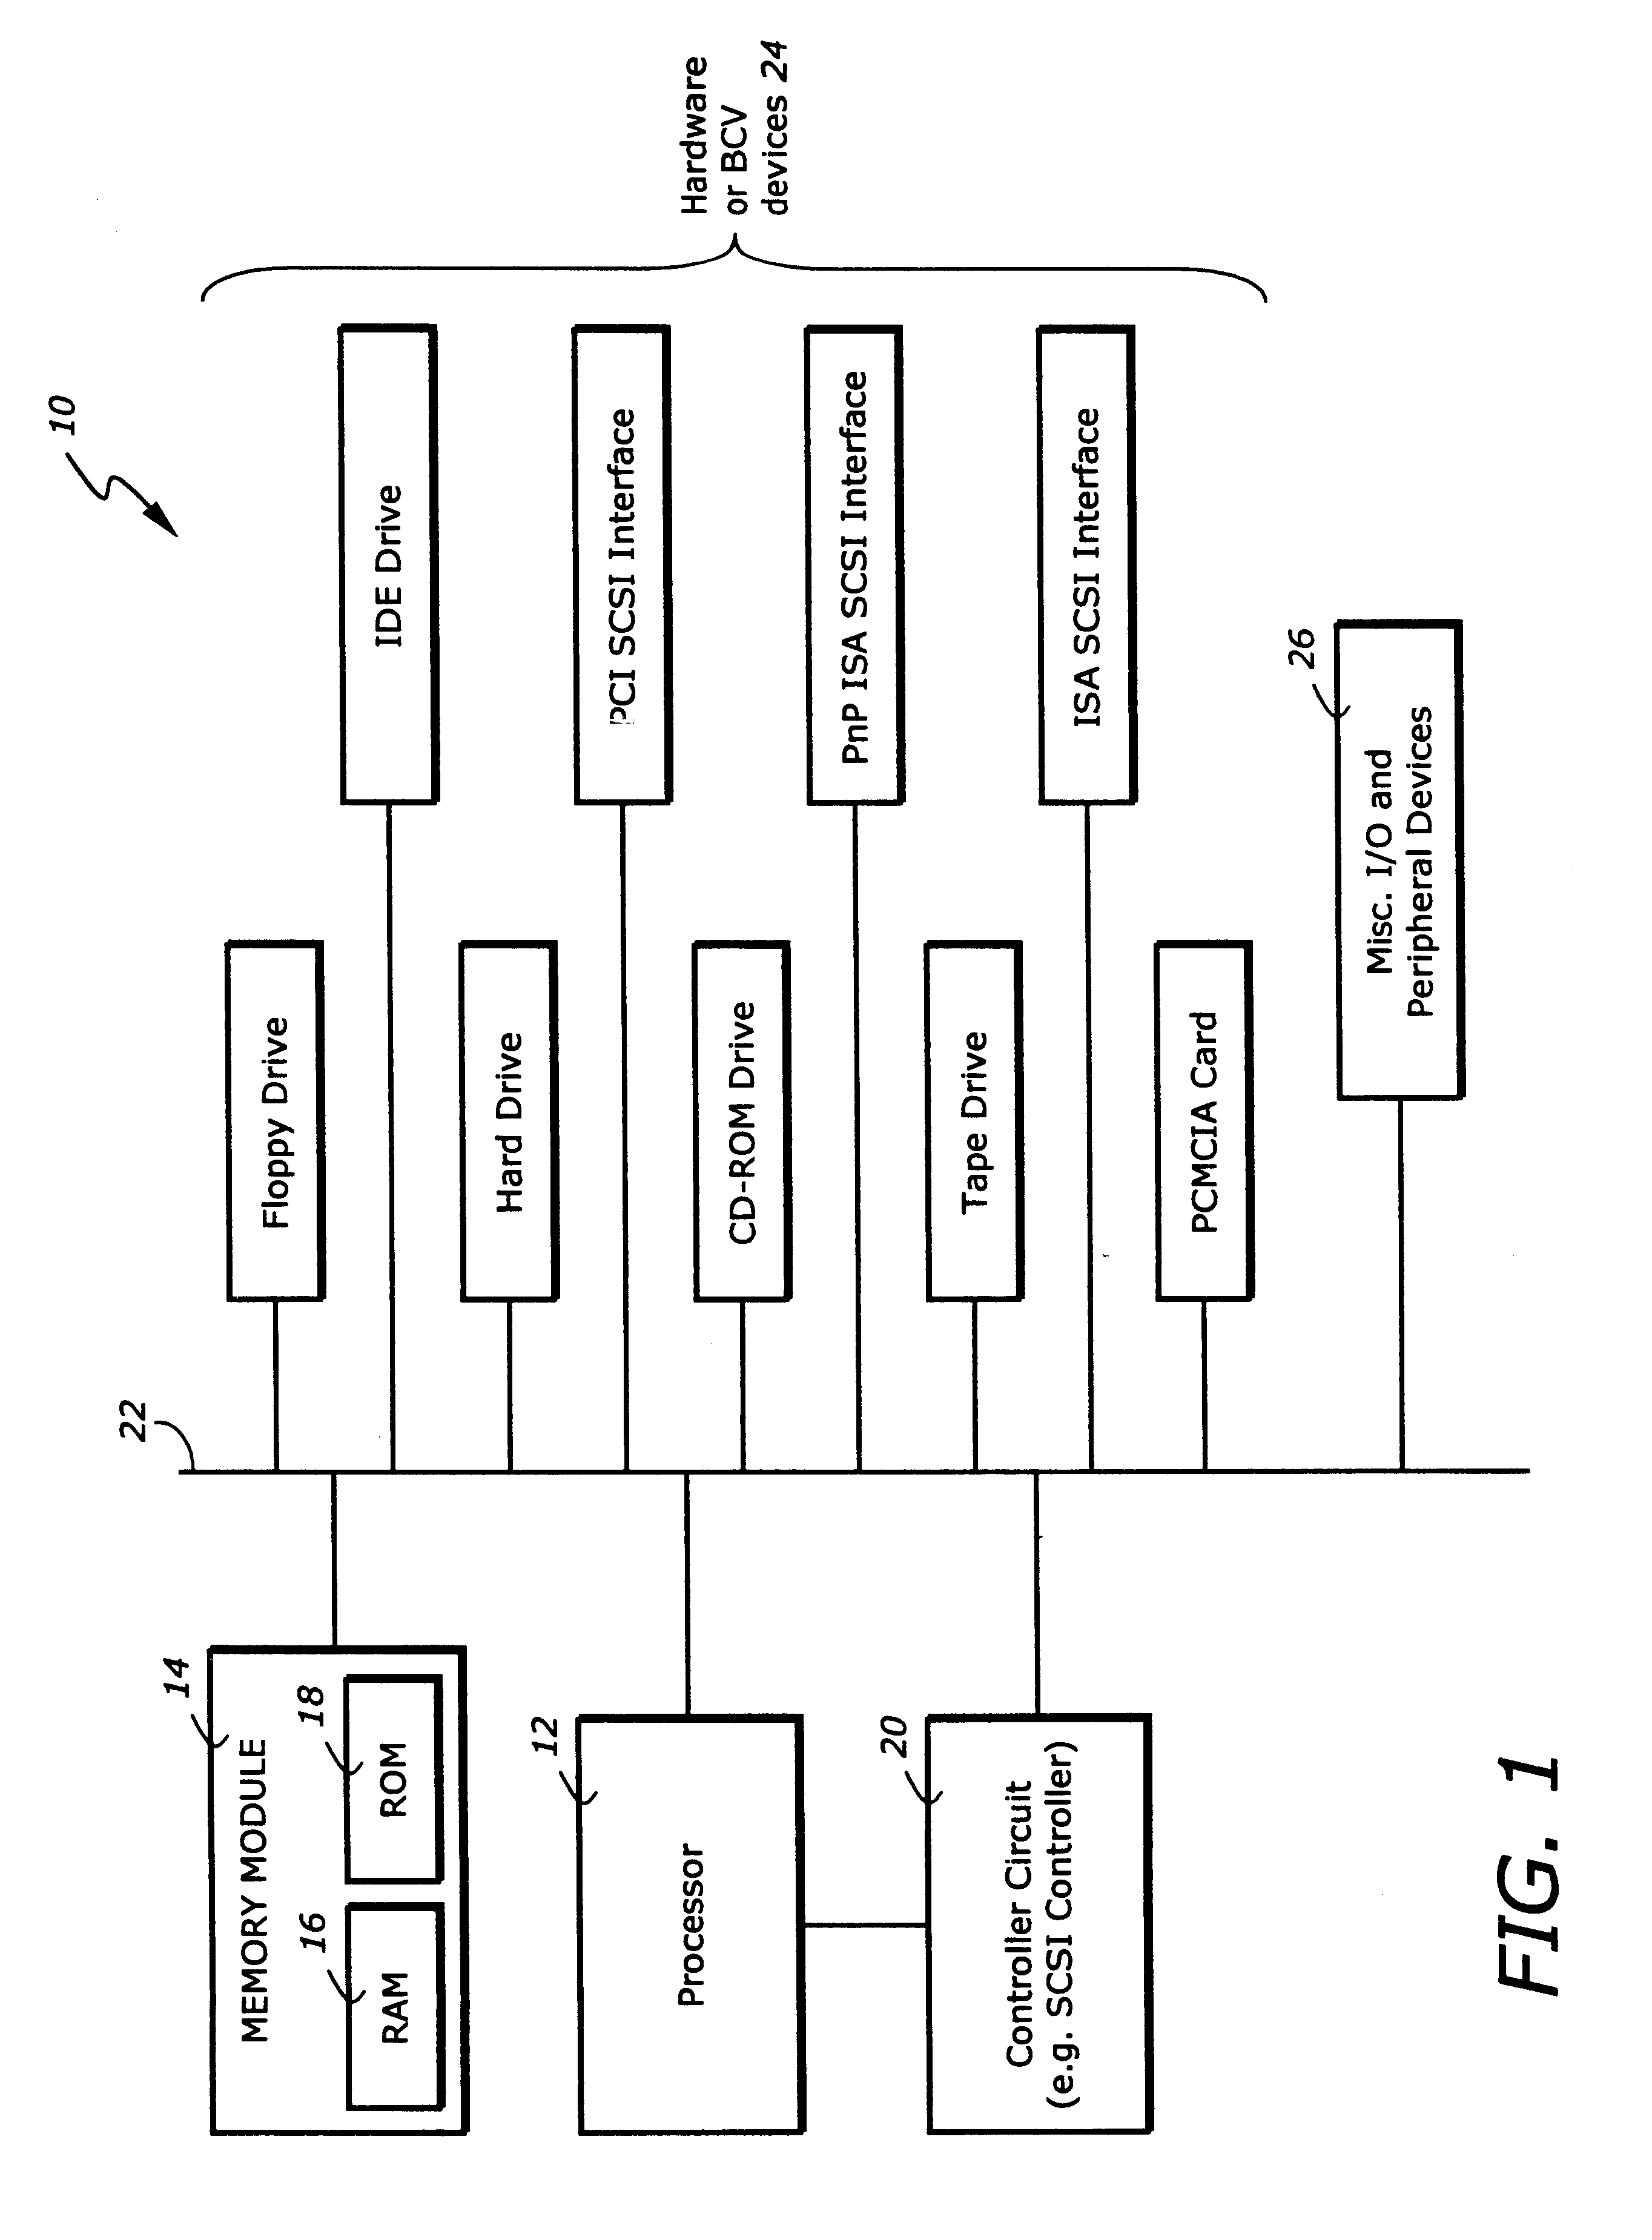 System for reconfiguring a boot device by swapping the logical device number of a user selected boot drive to a currently configured boot drive